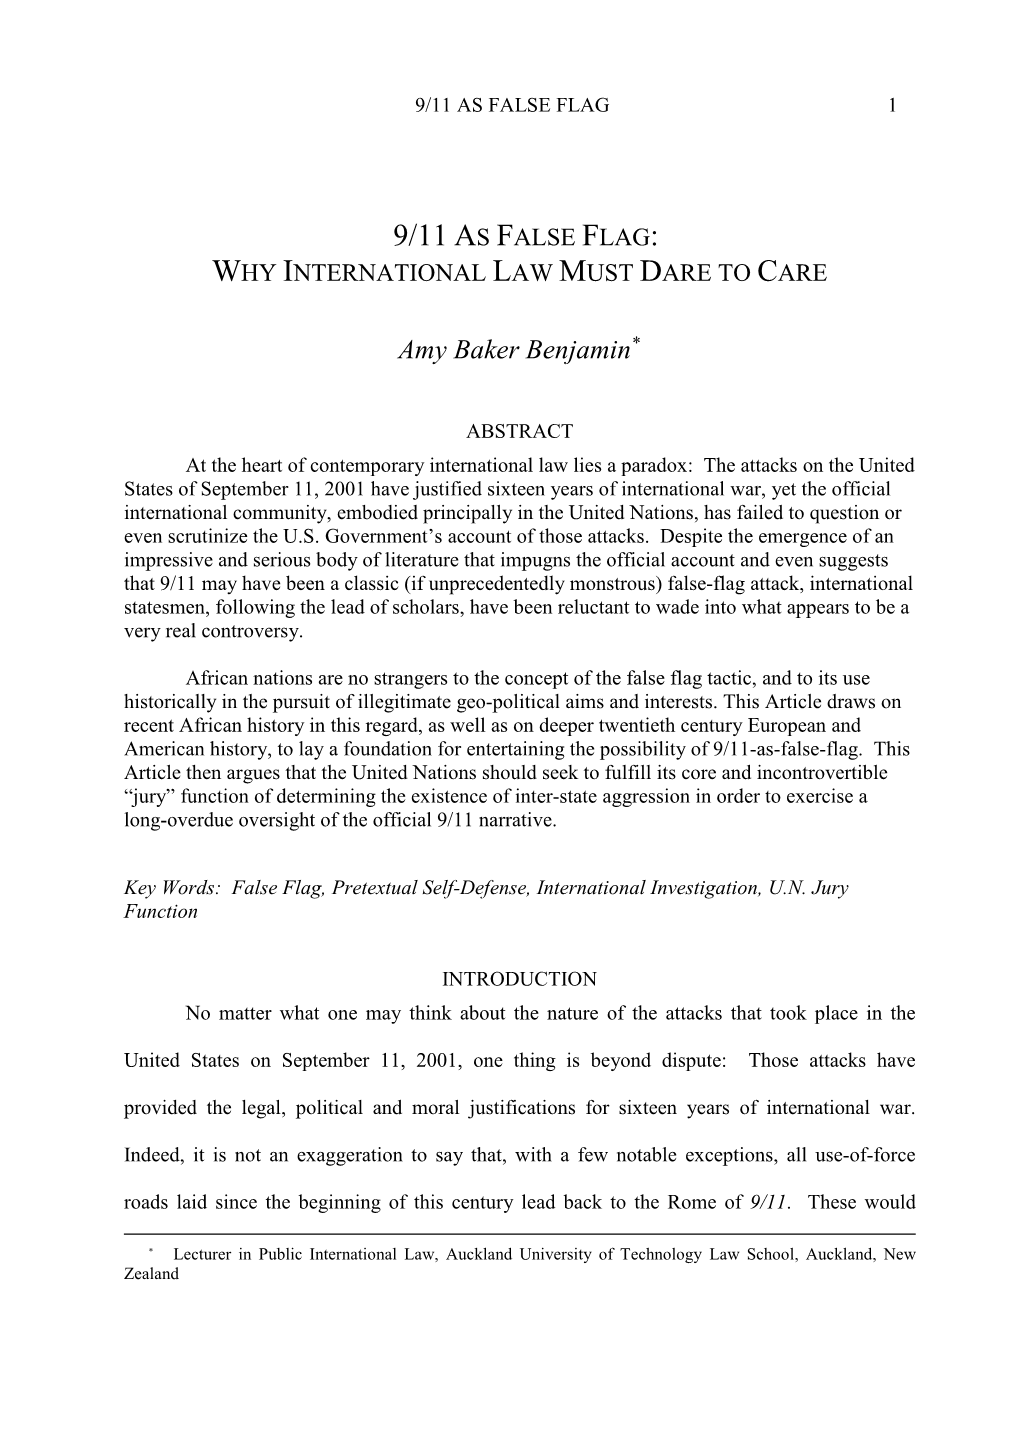 Law Review Article Template